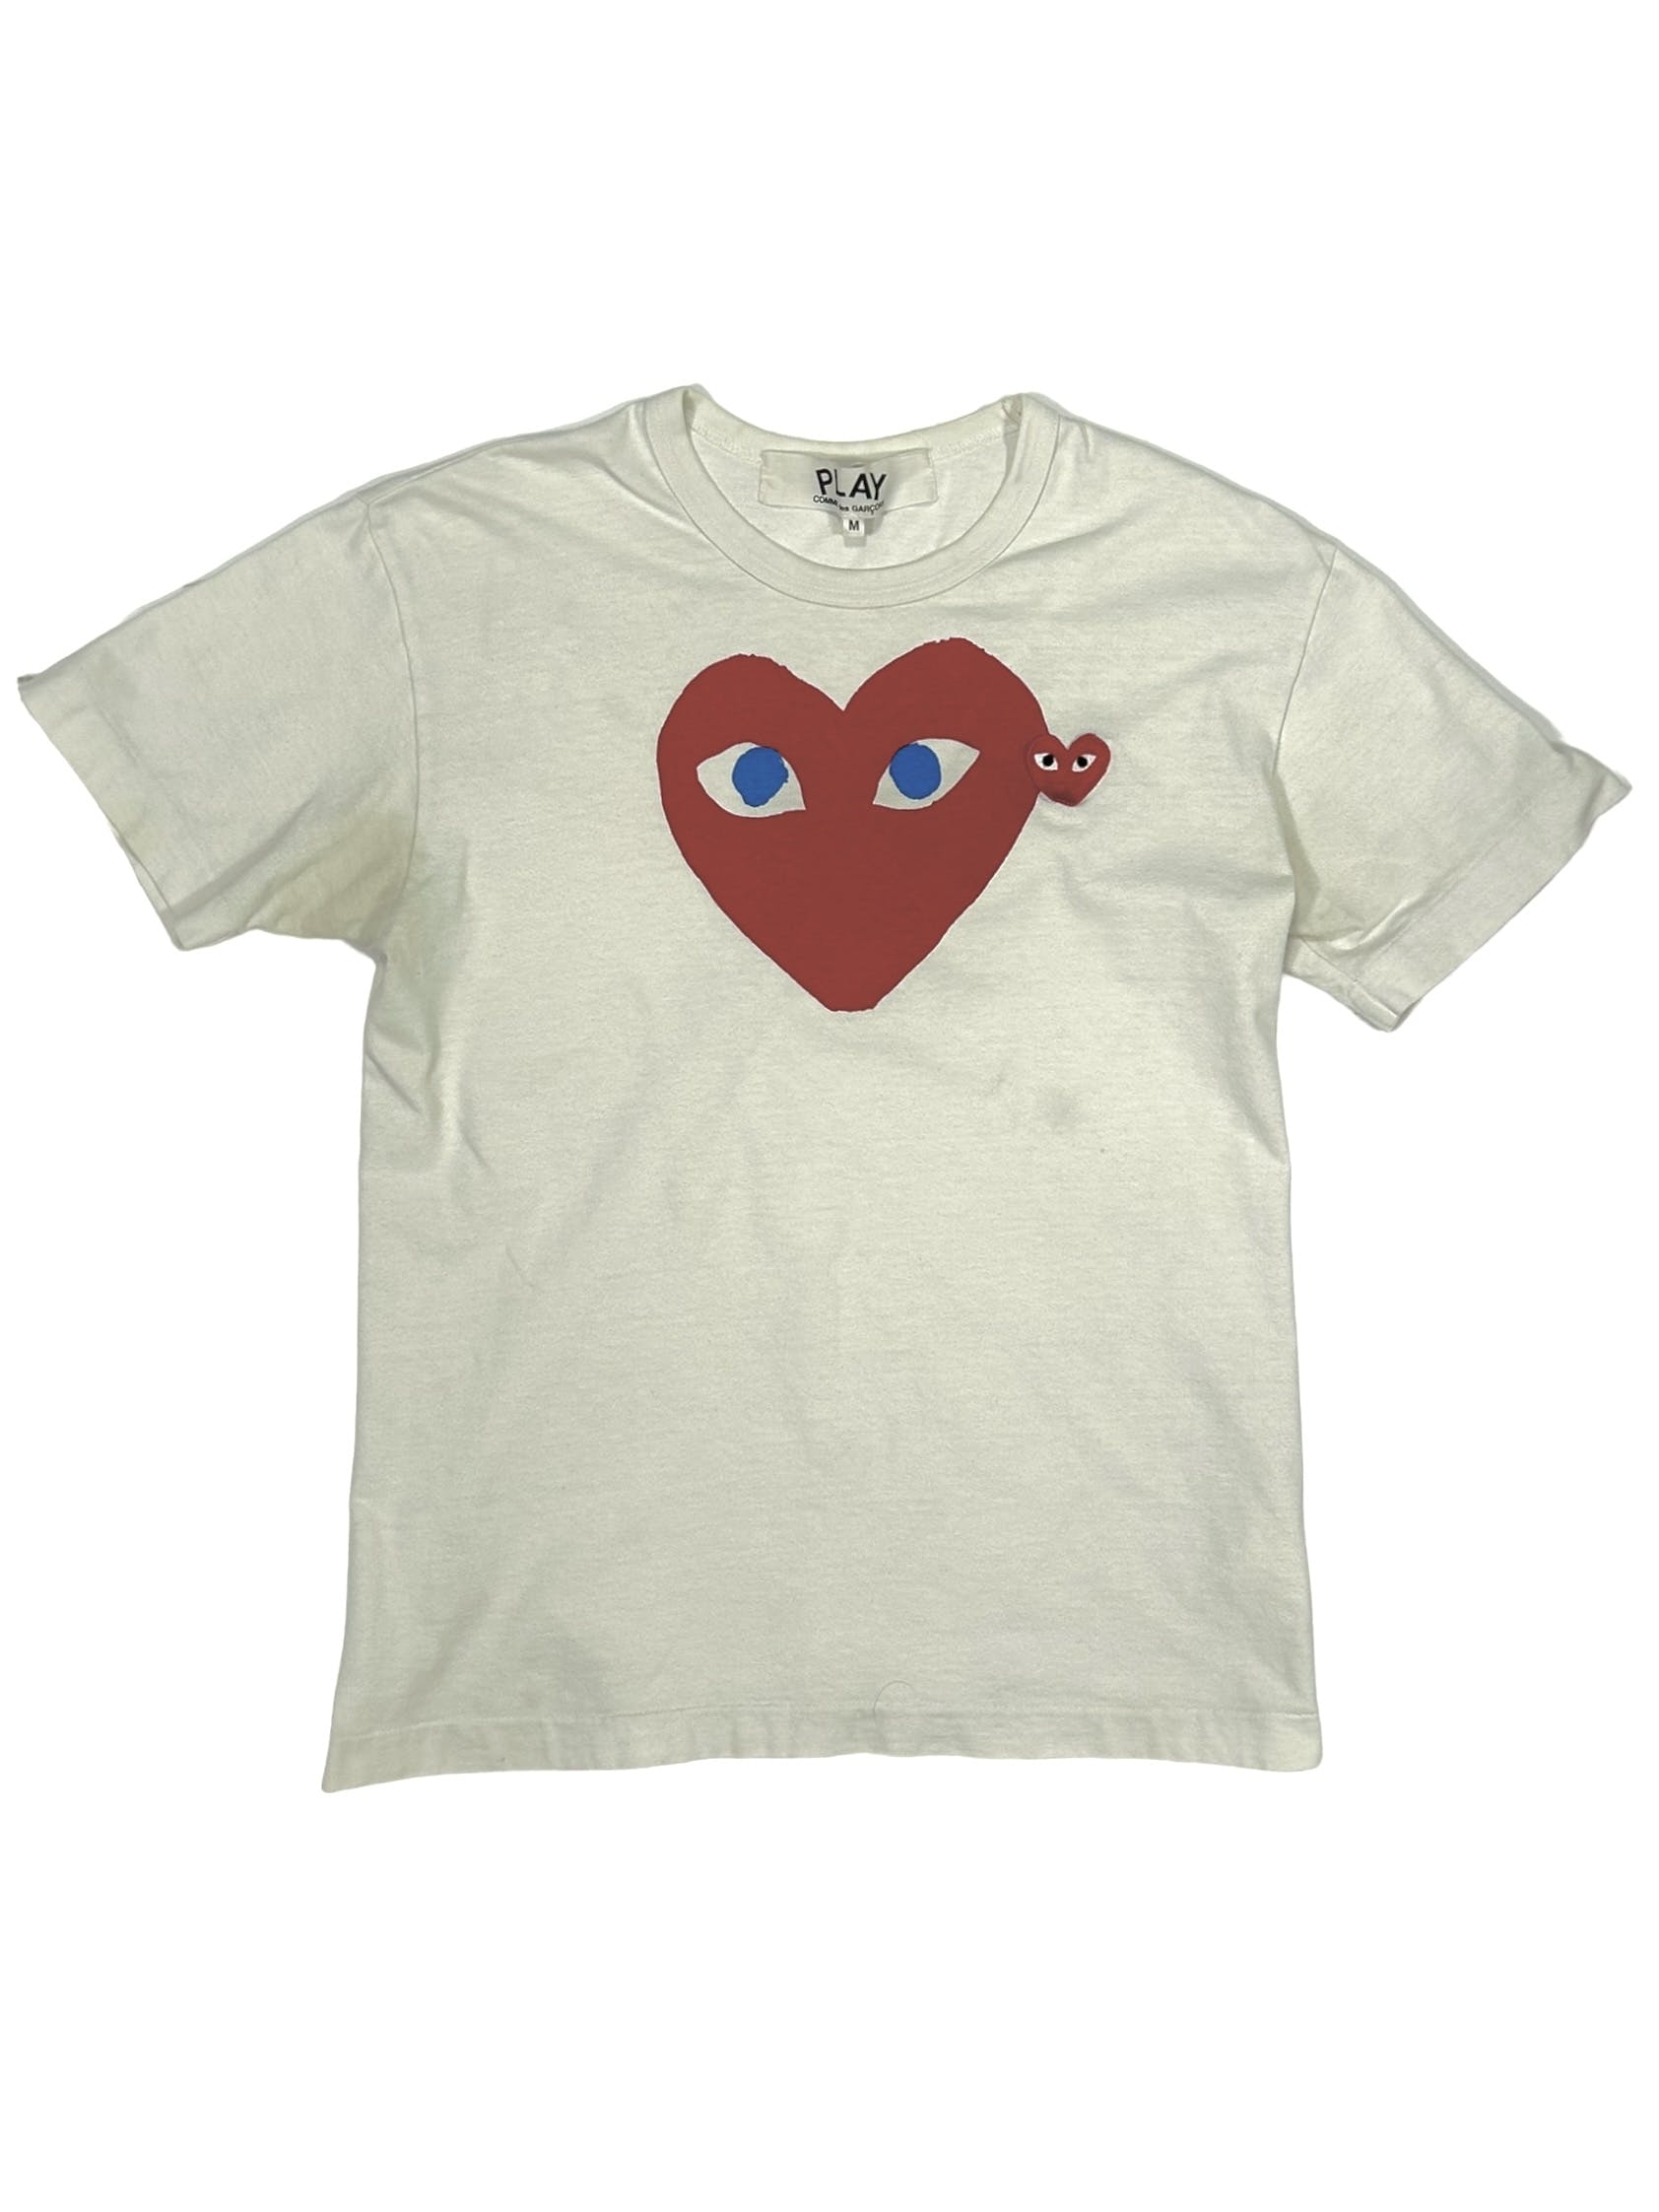 CDG Play Embroidered T-shirt - 1